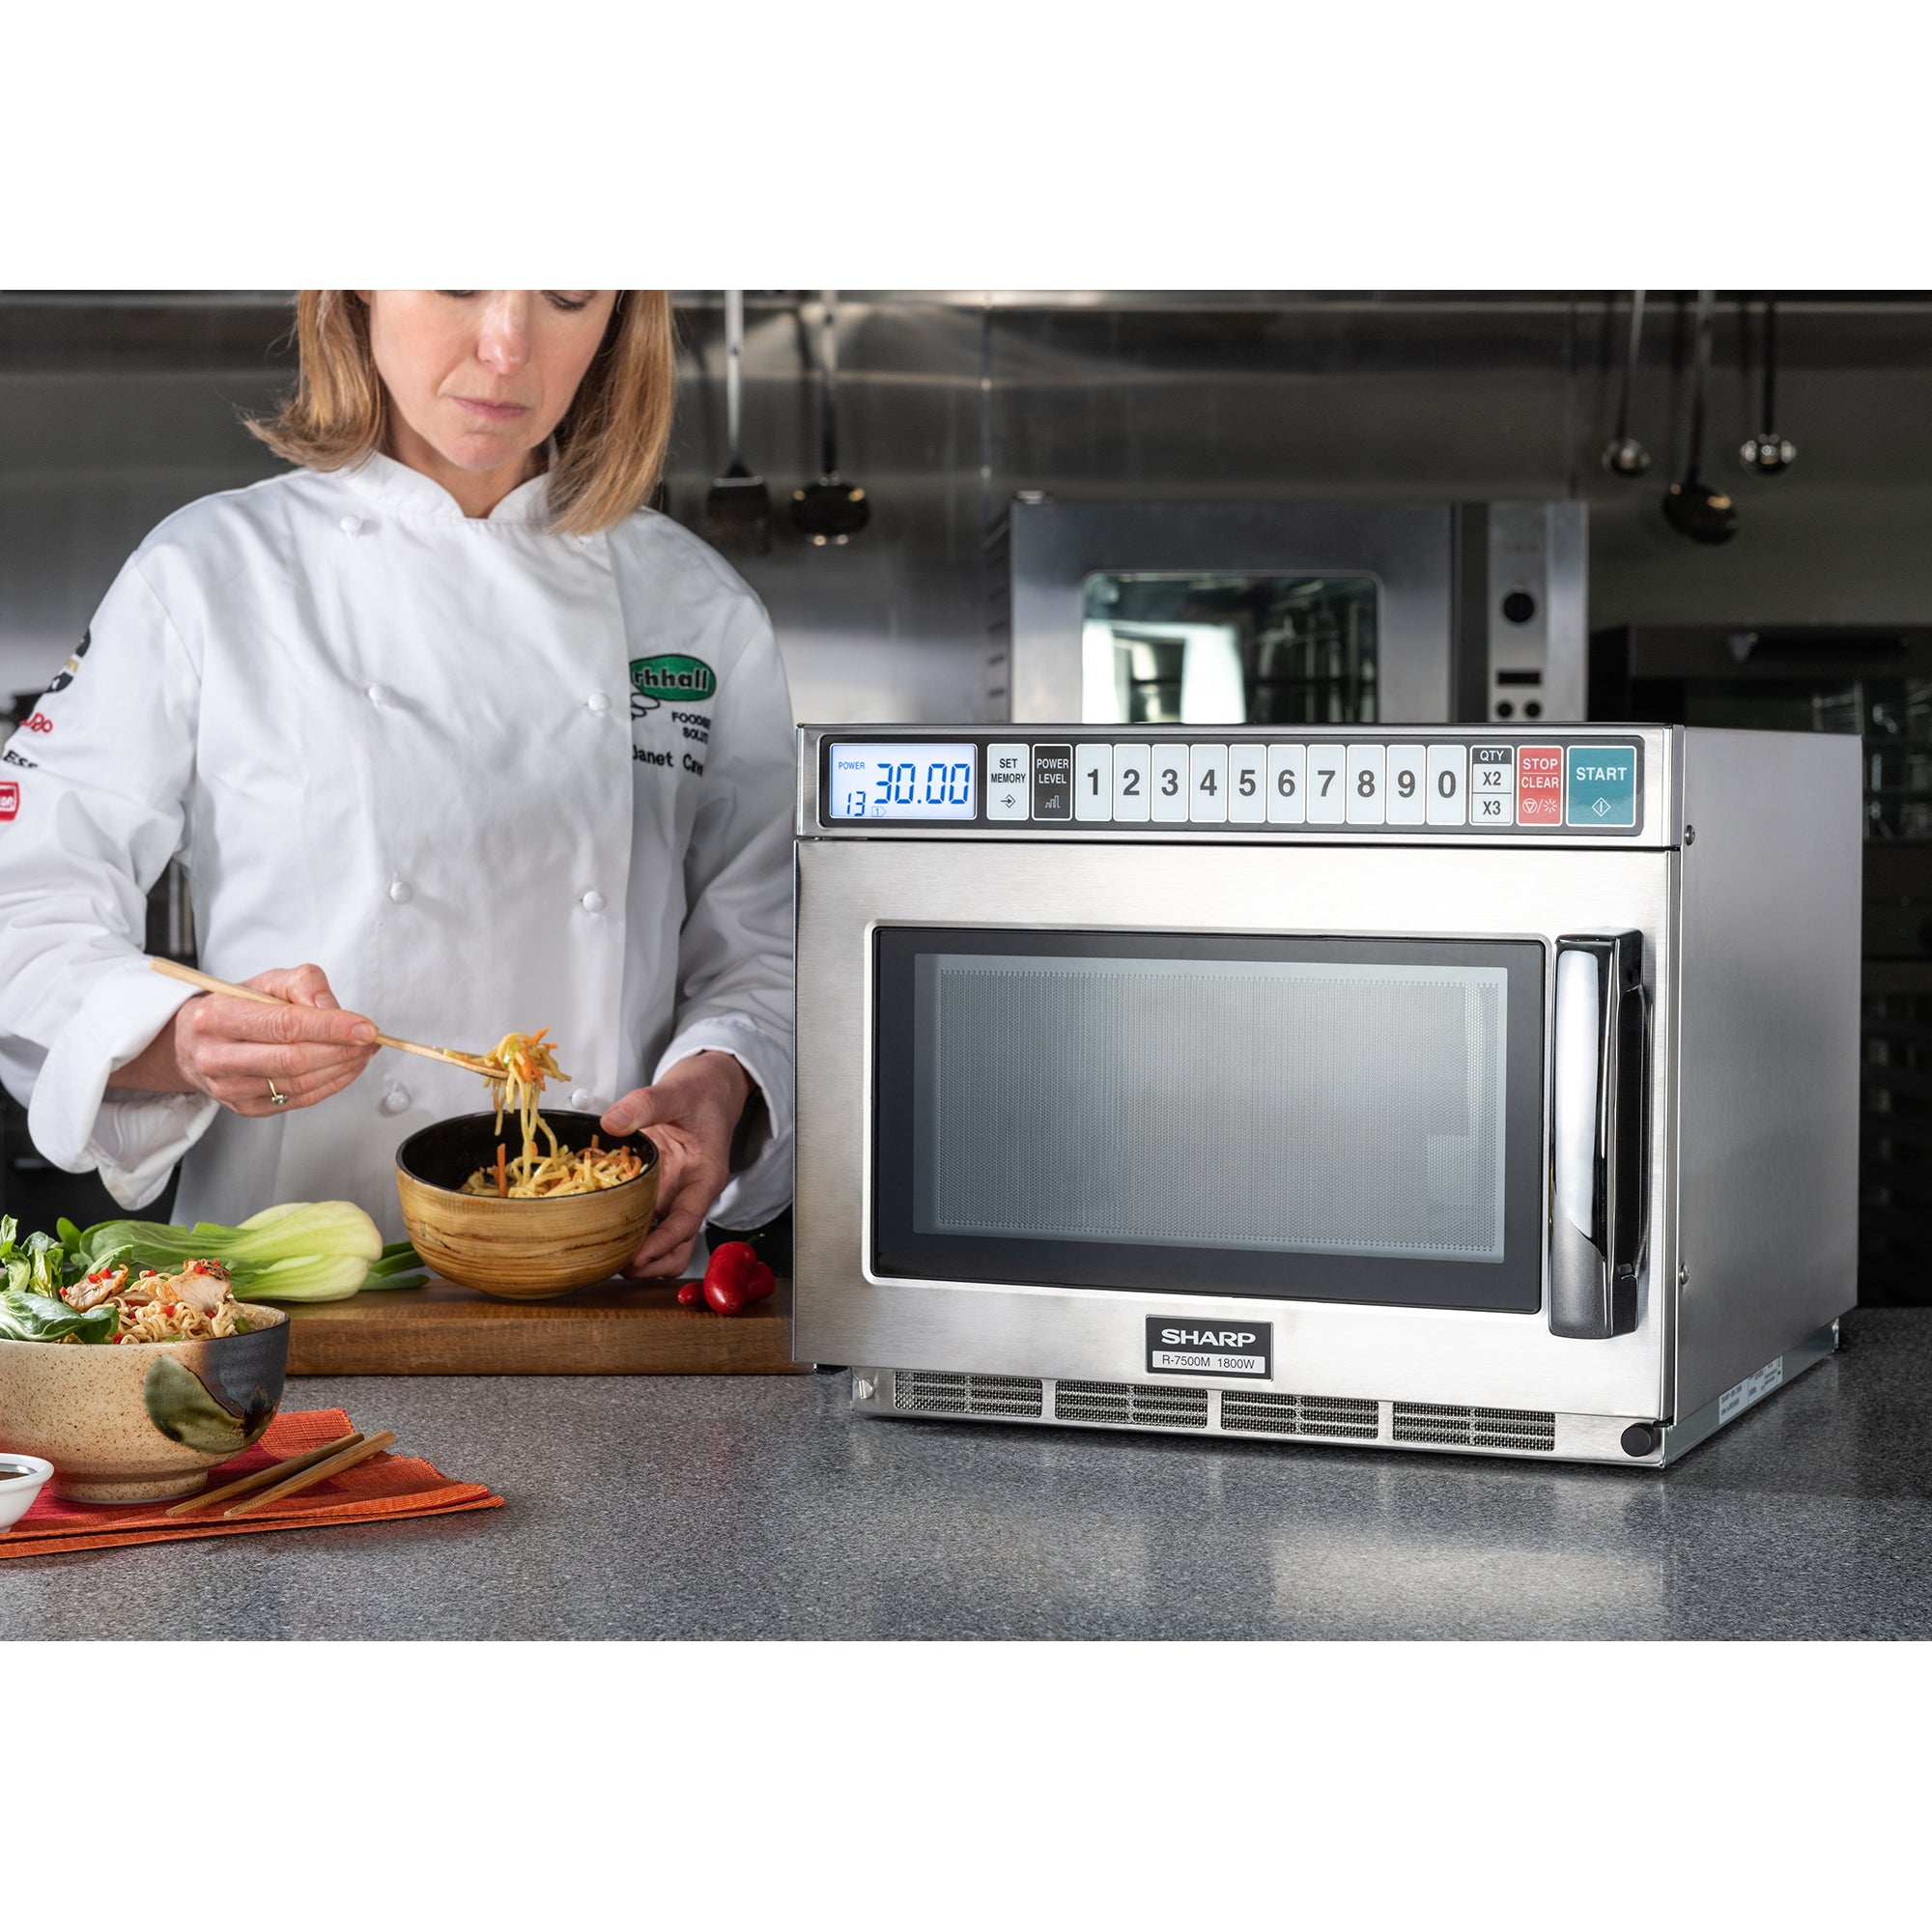 Sharp R1900M Microwave Oven Touch Control Programmable